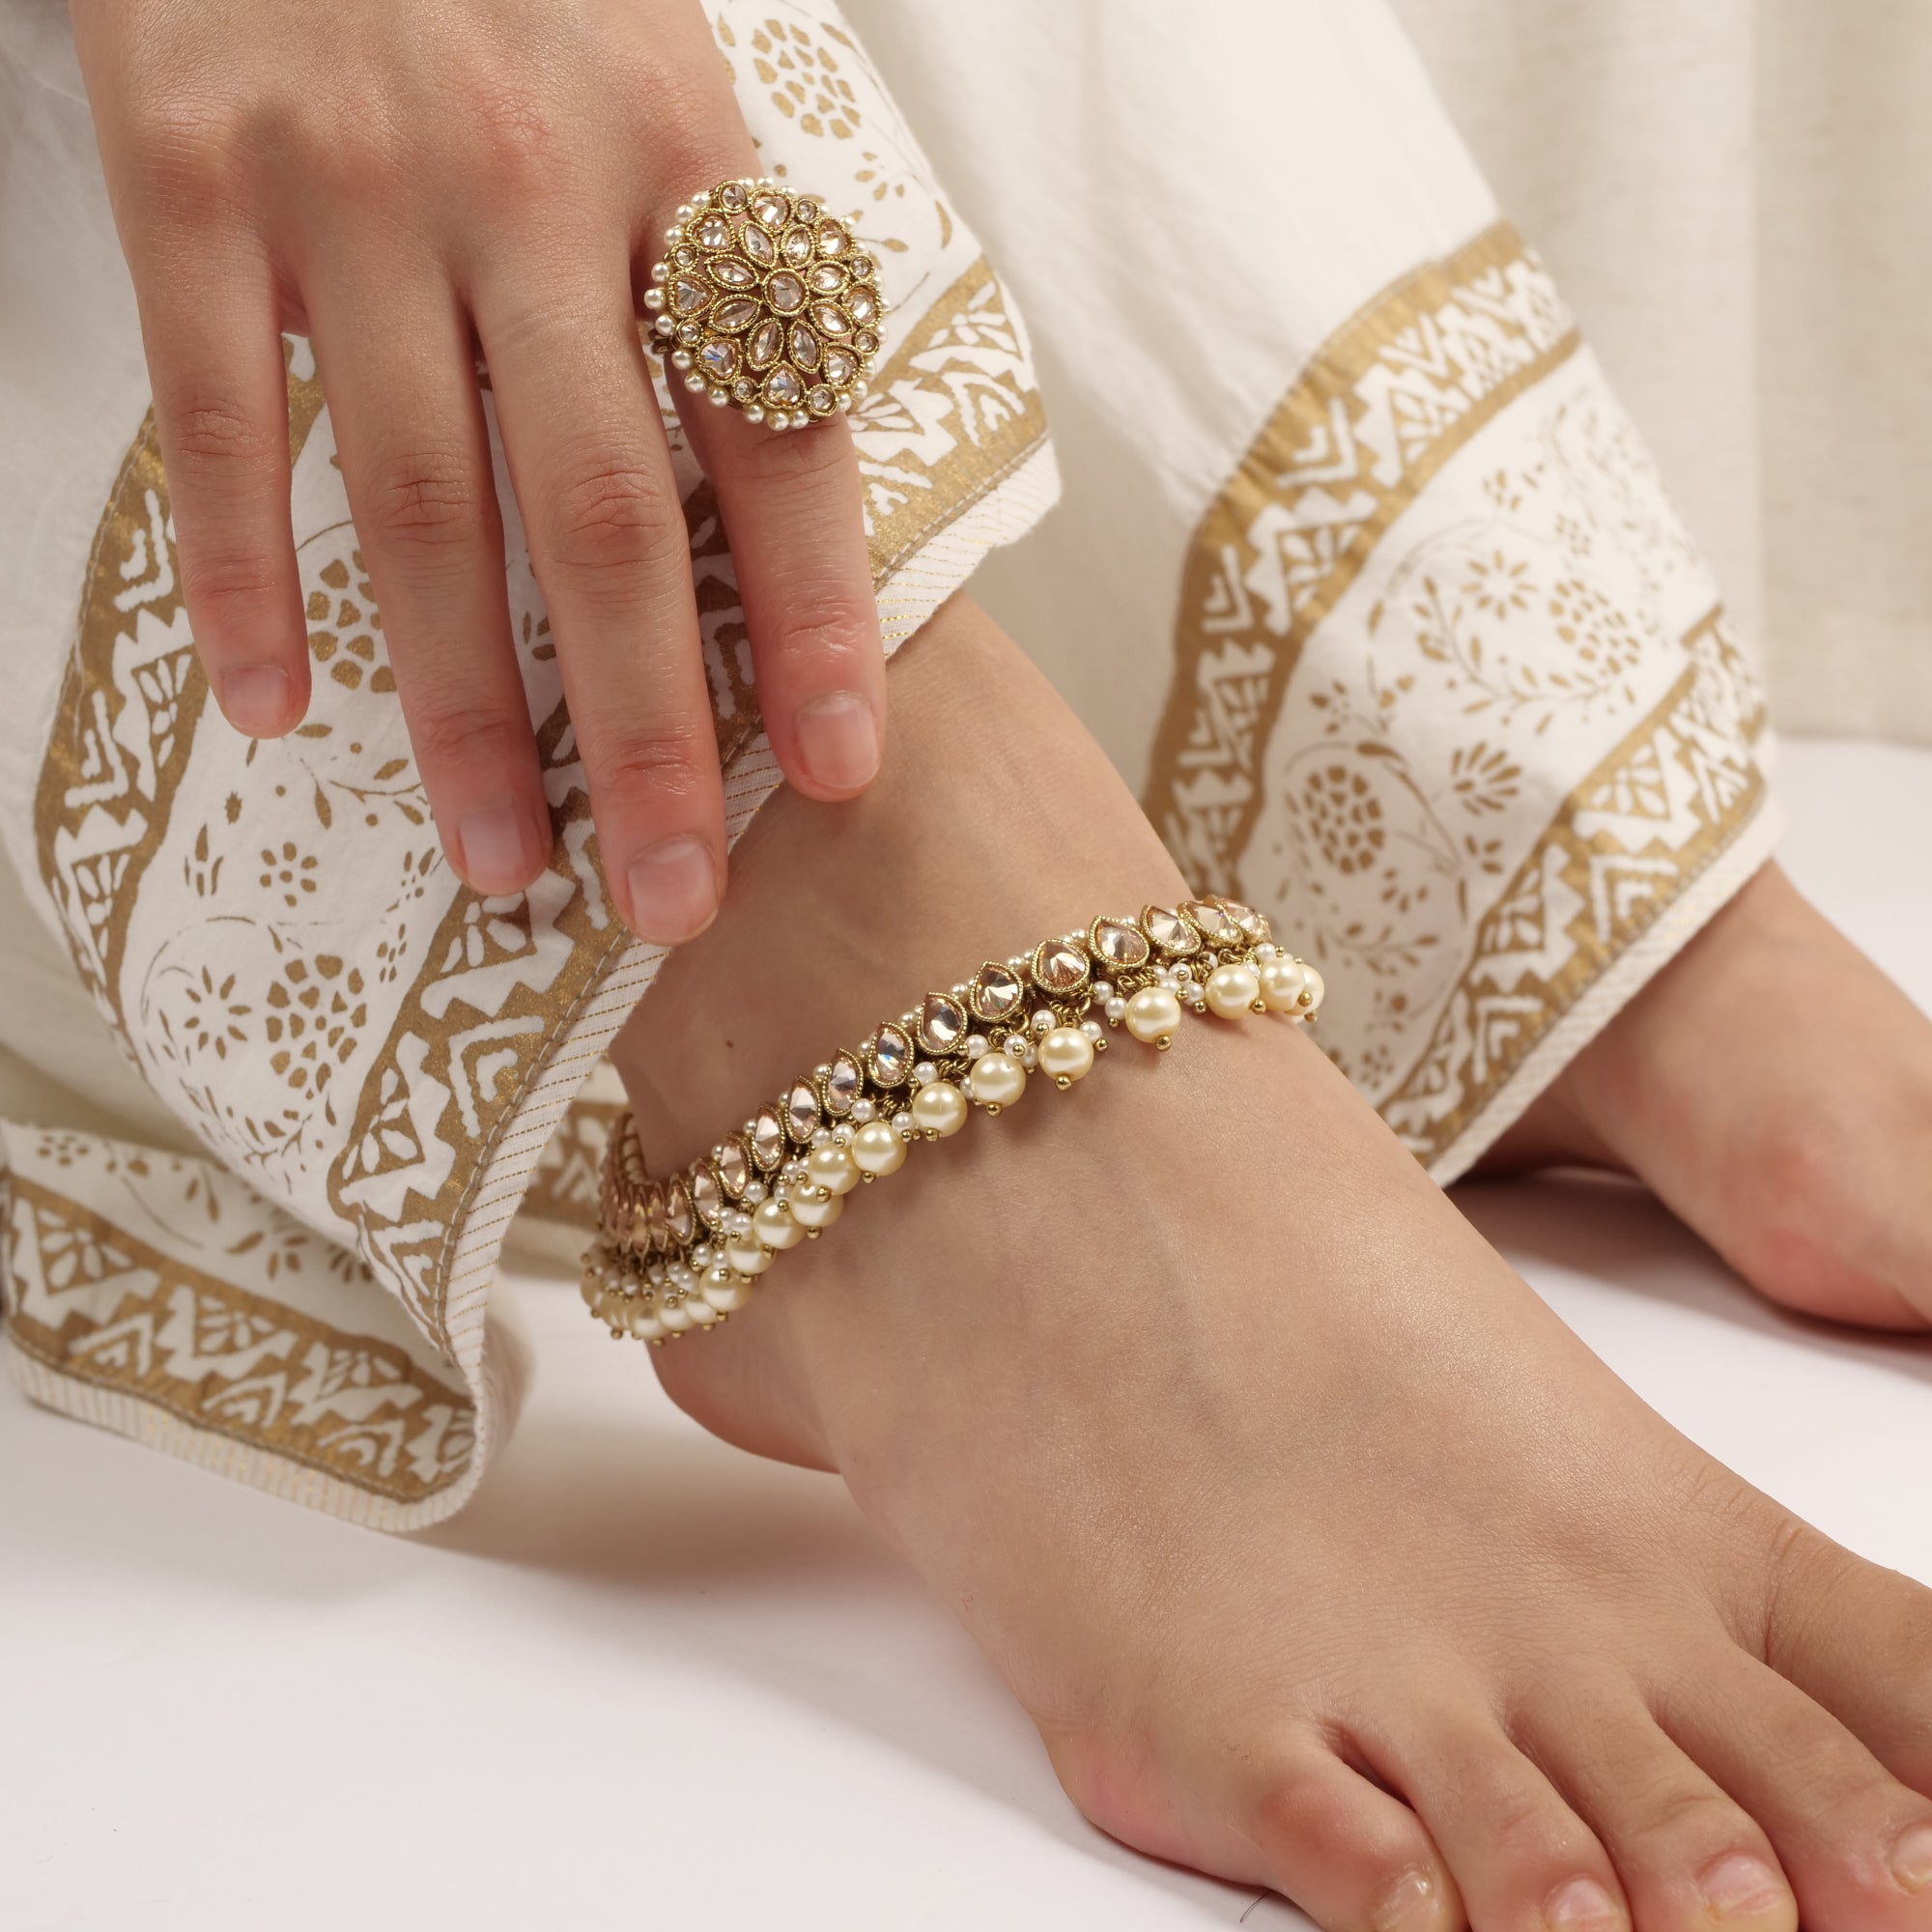 Hiral Pearl Anklet in Antique Gold